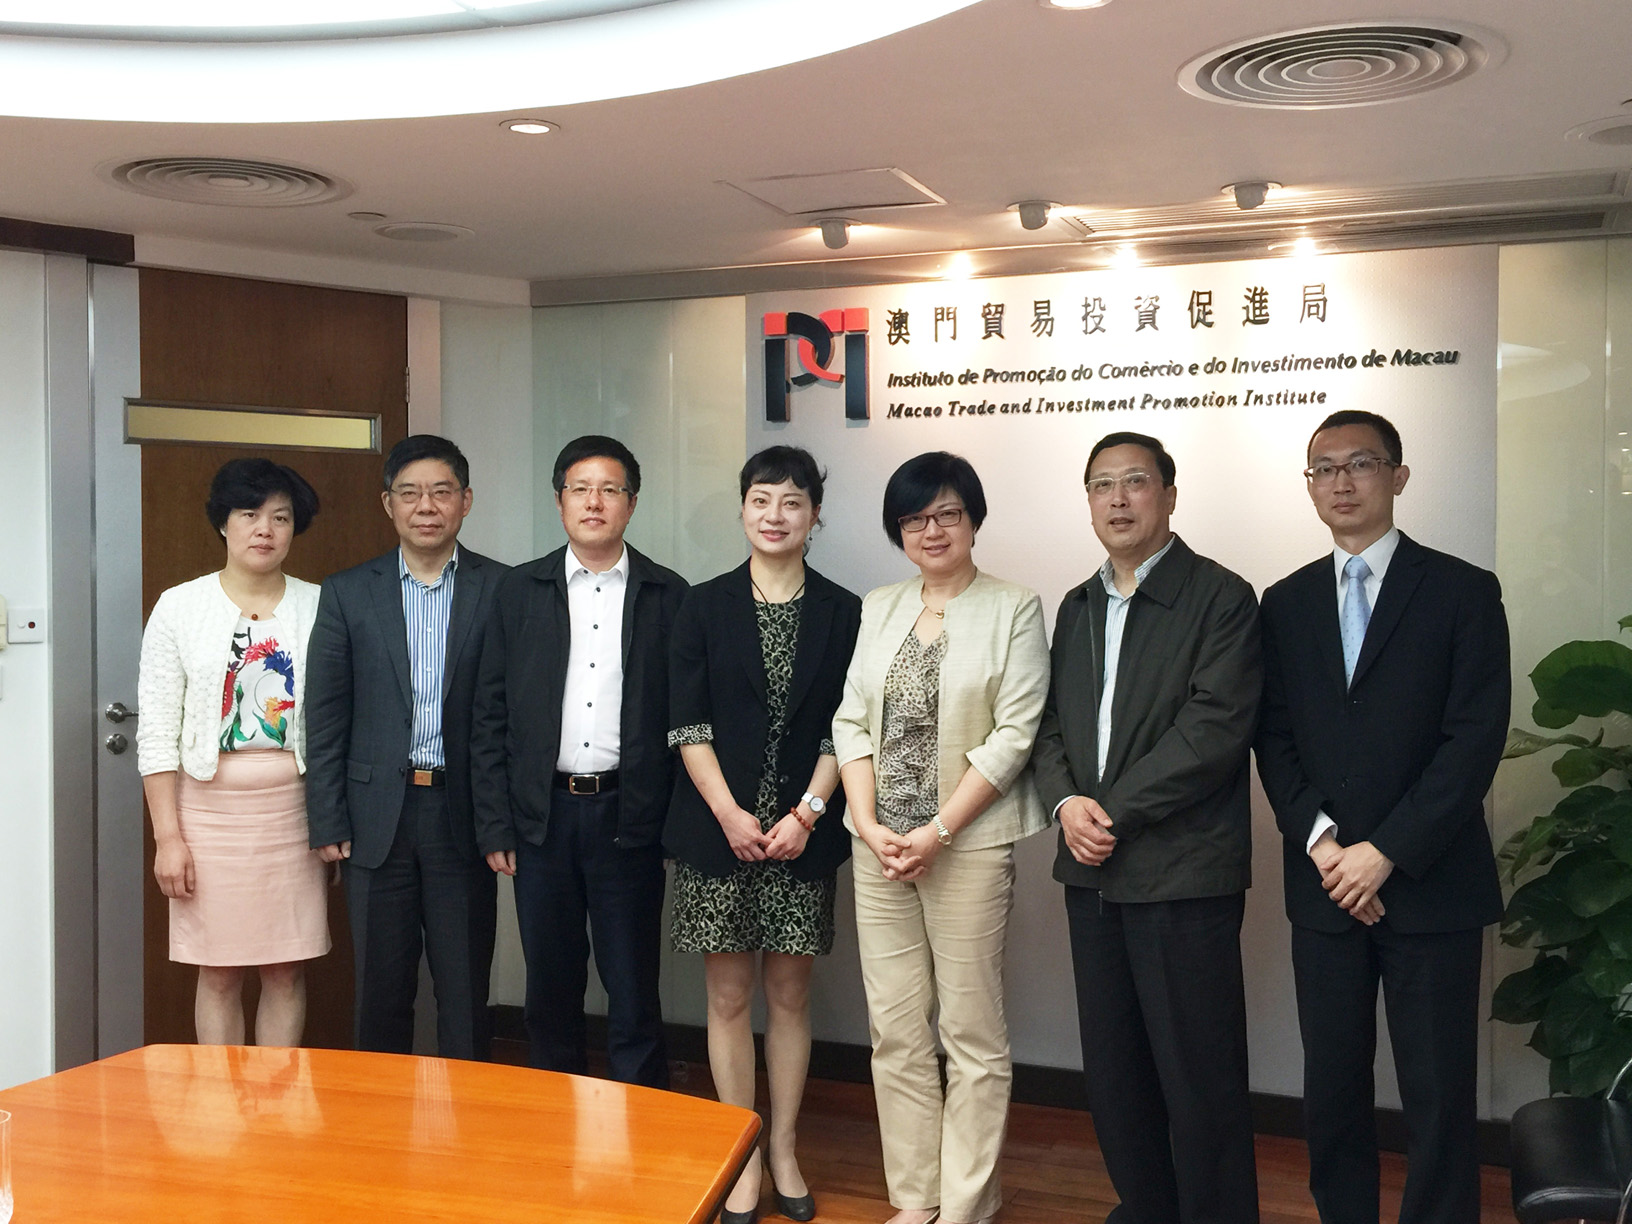 IPIM’s Executive Director Gloria Ung with Division Chief of Zhoushan Hong Kong and Macao Affairs Of ce Ge Qunke and the delegation at IPIM (26 April 2016)